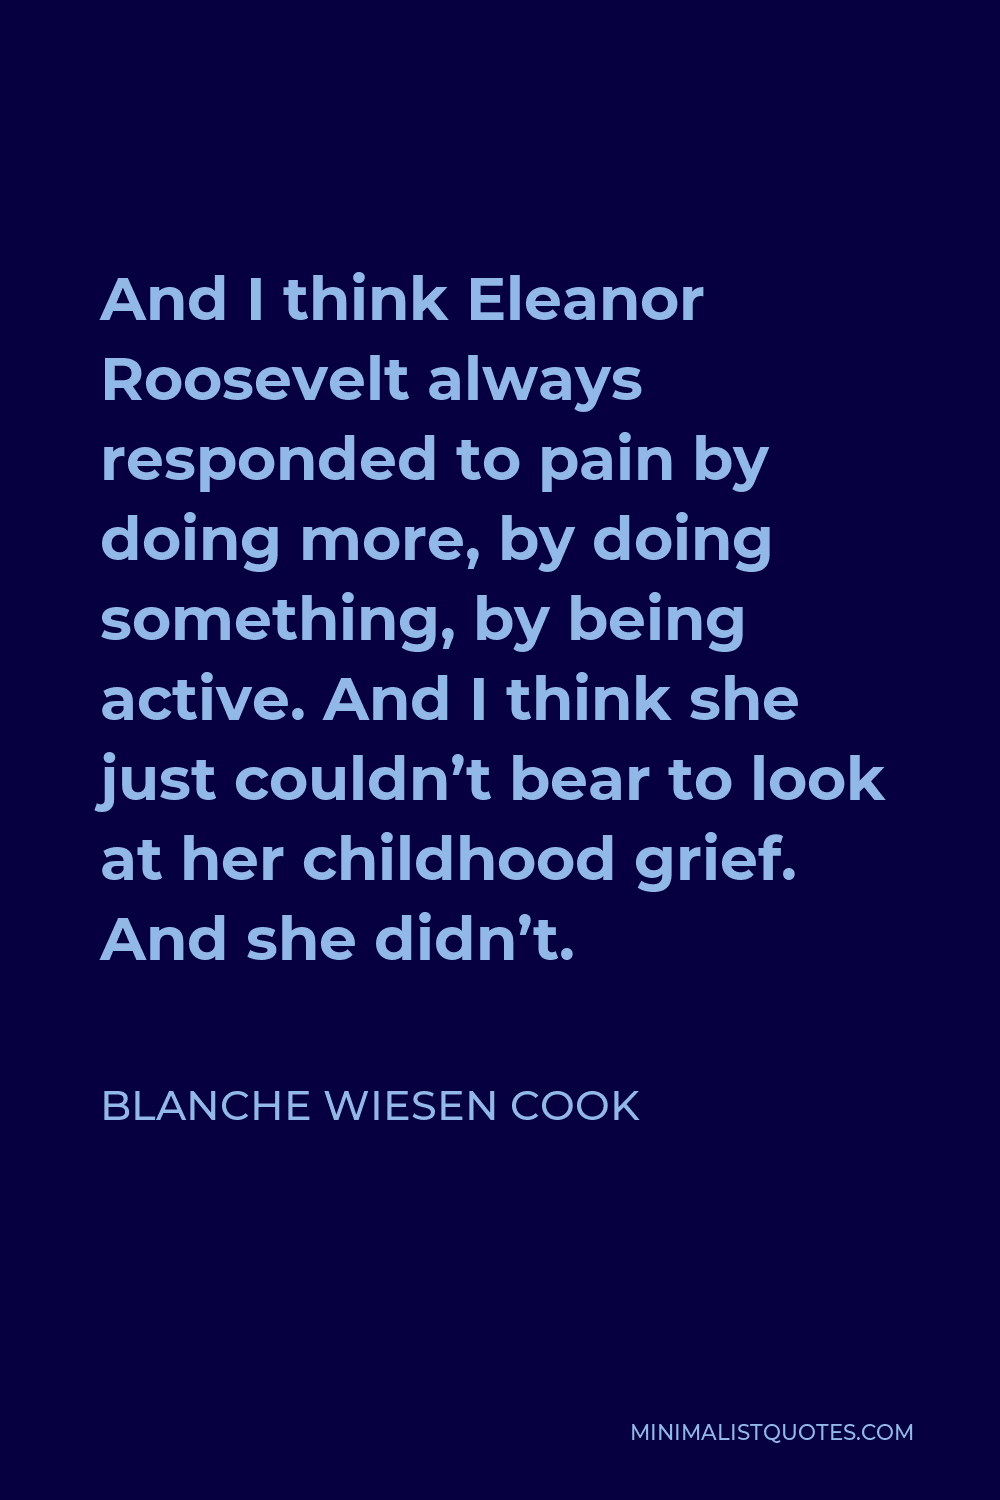 Blanche Wiesen Cook Quote - And I think Eleanor Roosevelt always responded to pain by doing more, by doing something, by being active. And I think she just couldn’t bear to look at her childhood grief. And she didn’t.